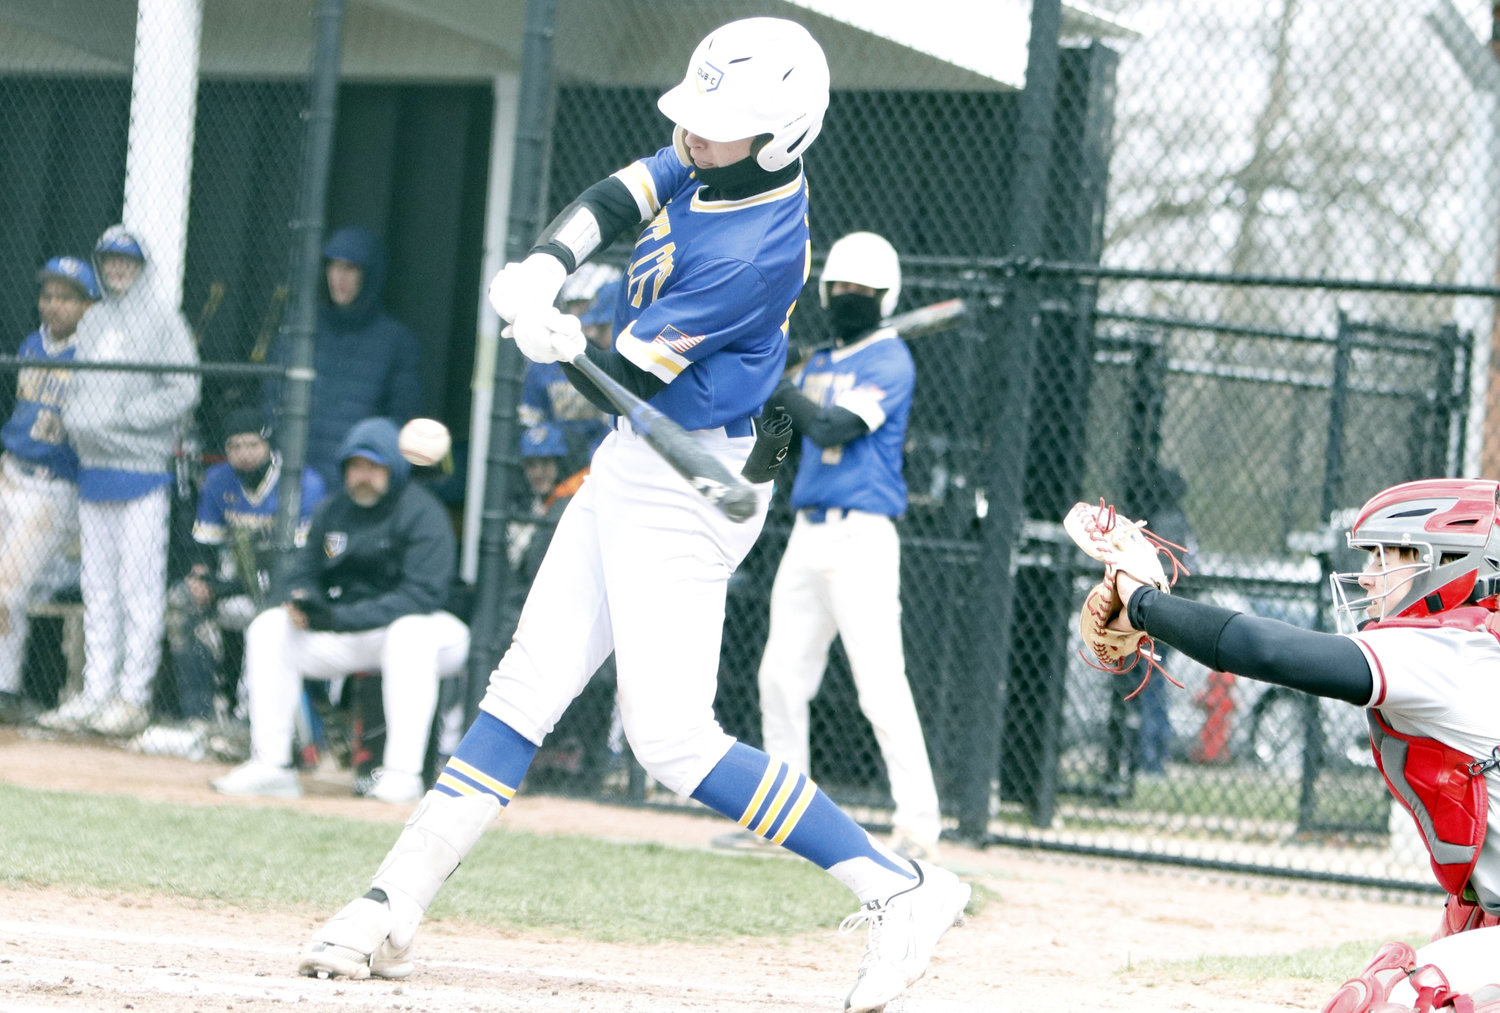 Wright City sophomore Jake Orf swings at a pitch during Saturday's game.